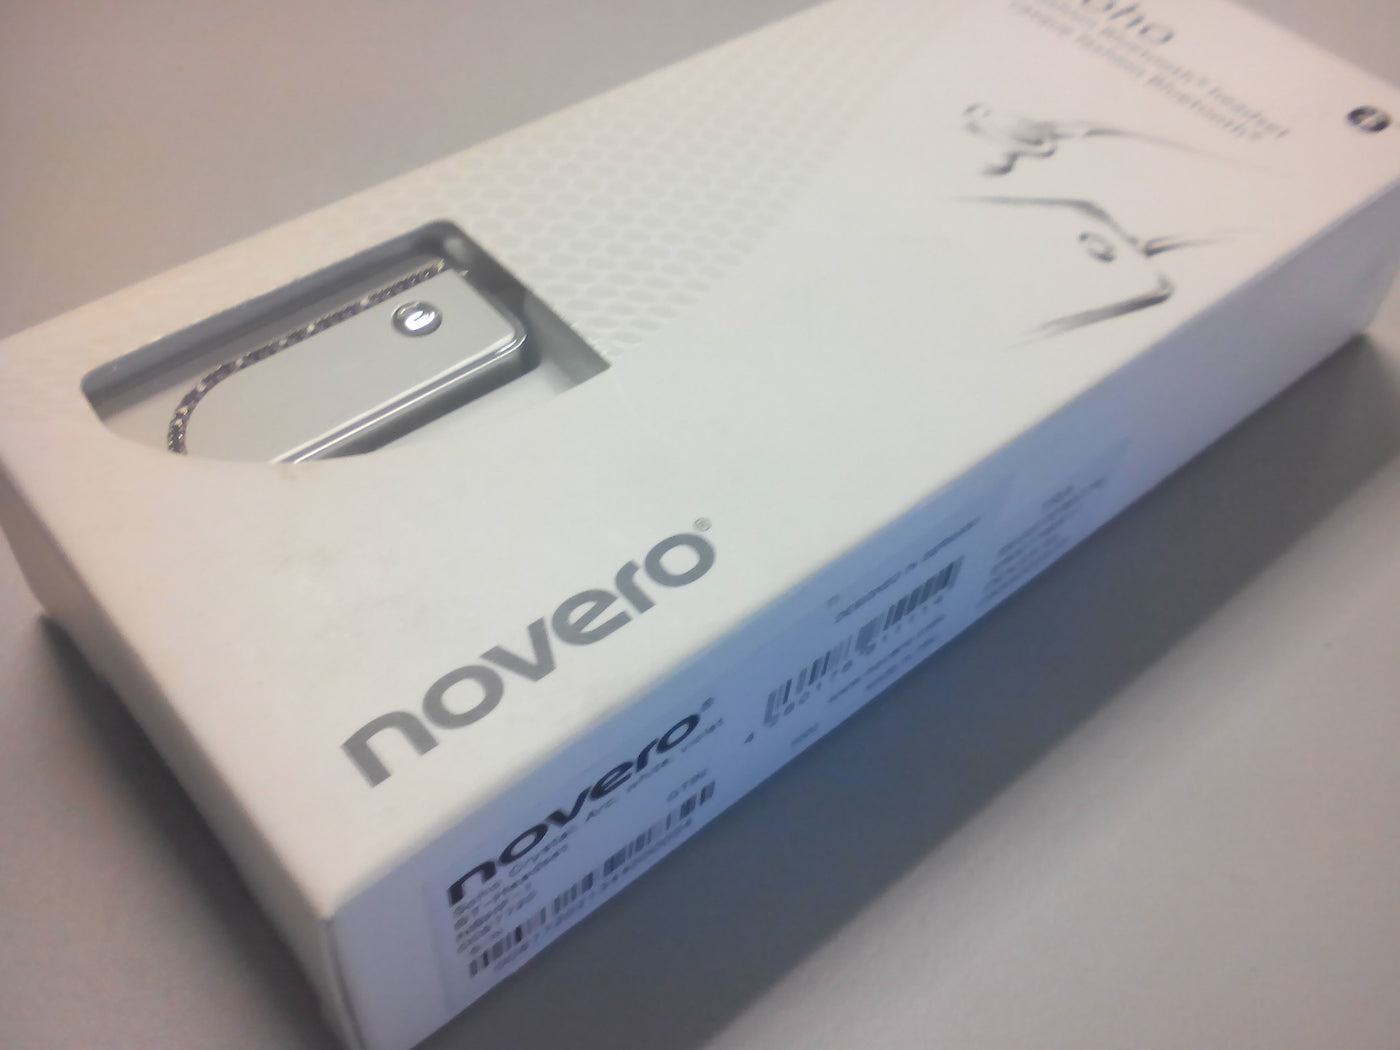 Novero Soho Crystal Arc Bluetooth Headset - White / Violet - PC User | PC Parts And Spares | FREE UK DELIVERY